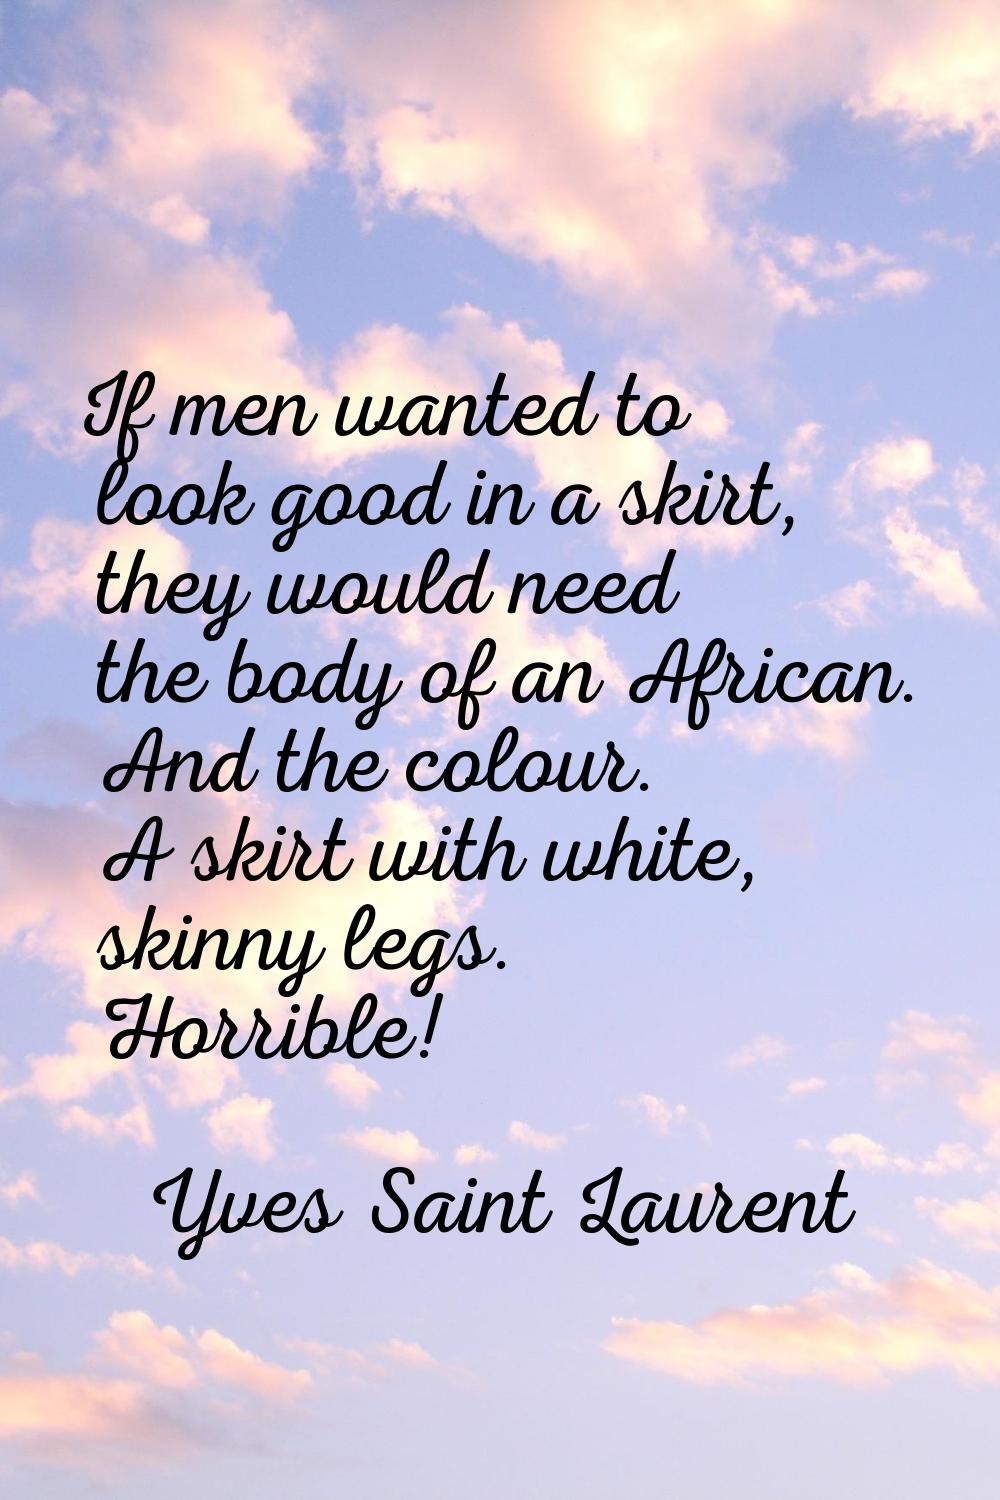 If men wanted to look good in a skirt, they would need the body of an African. And the colour. A sk